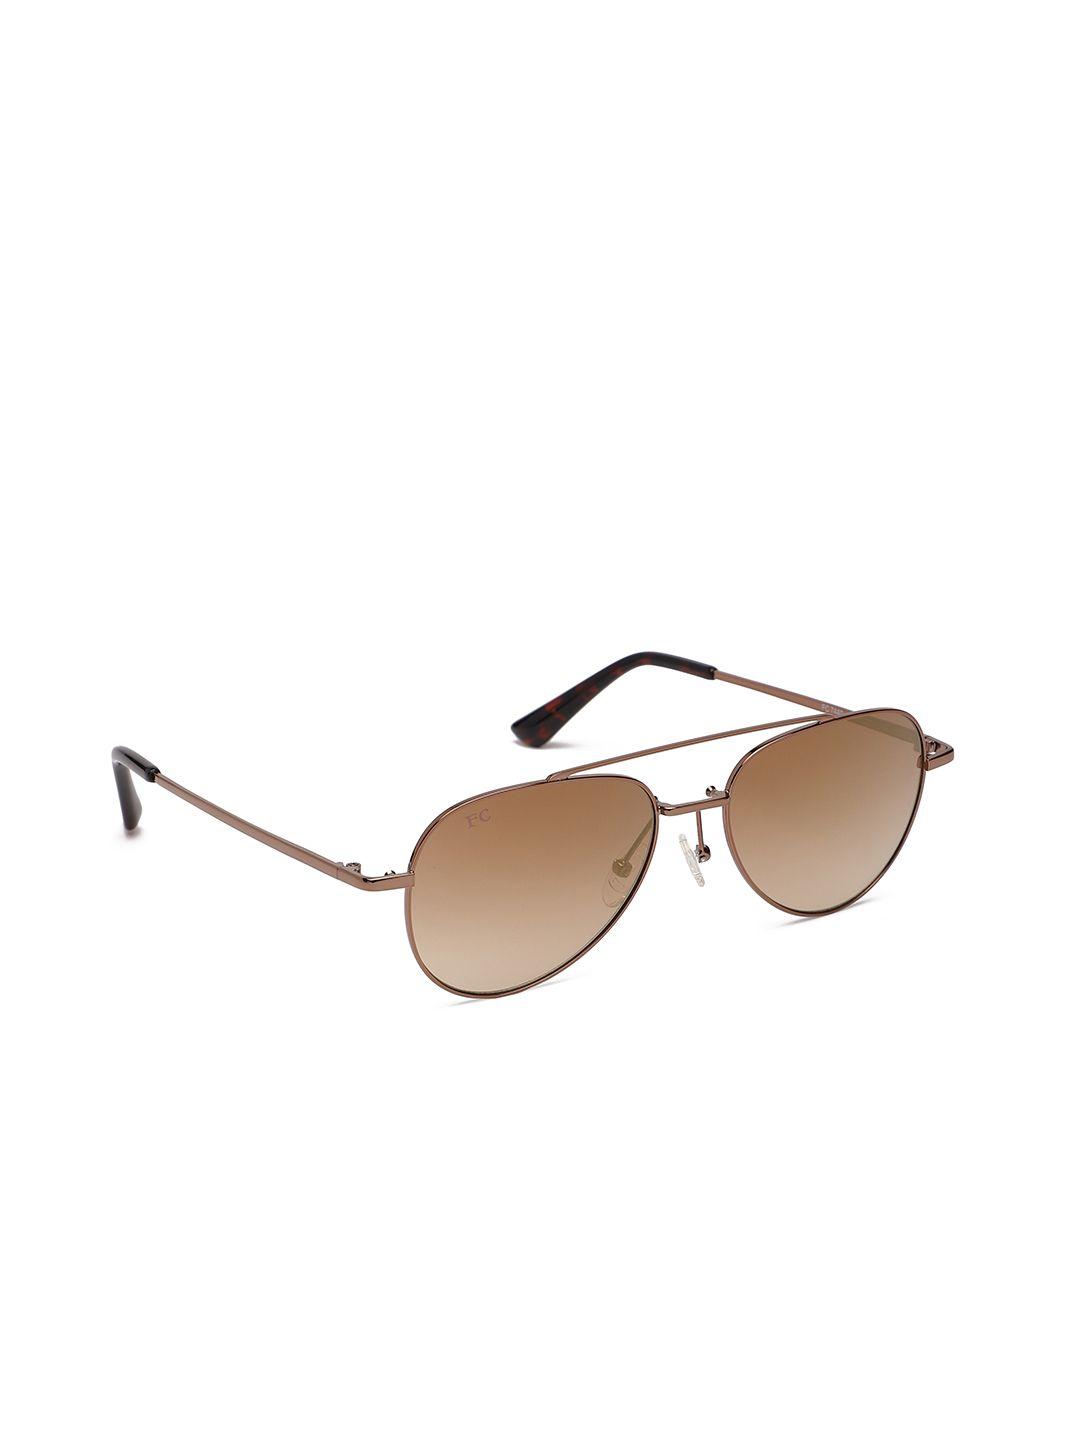 french connection unisex aviator sunglasses fc 7440